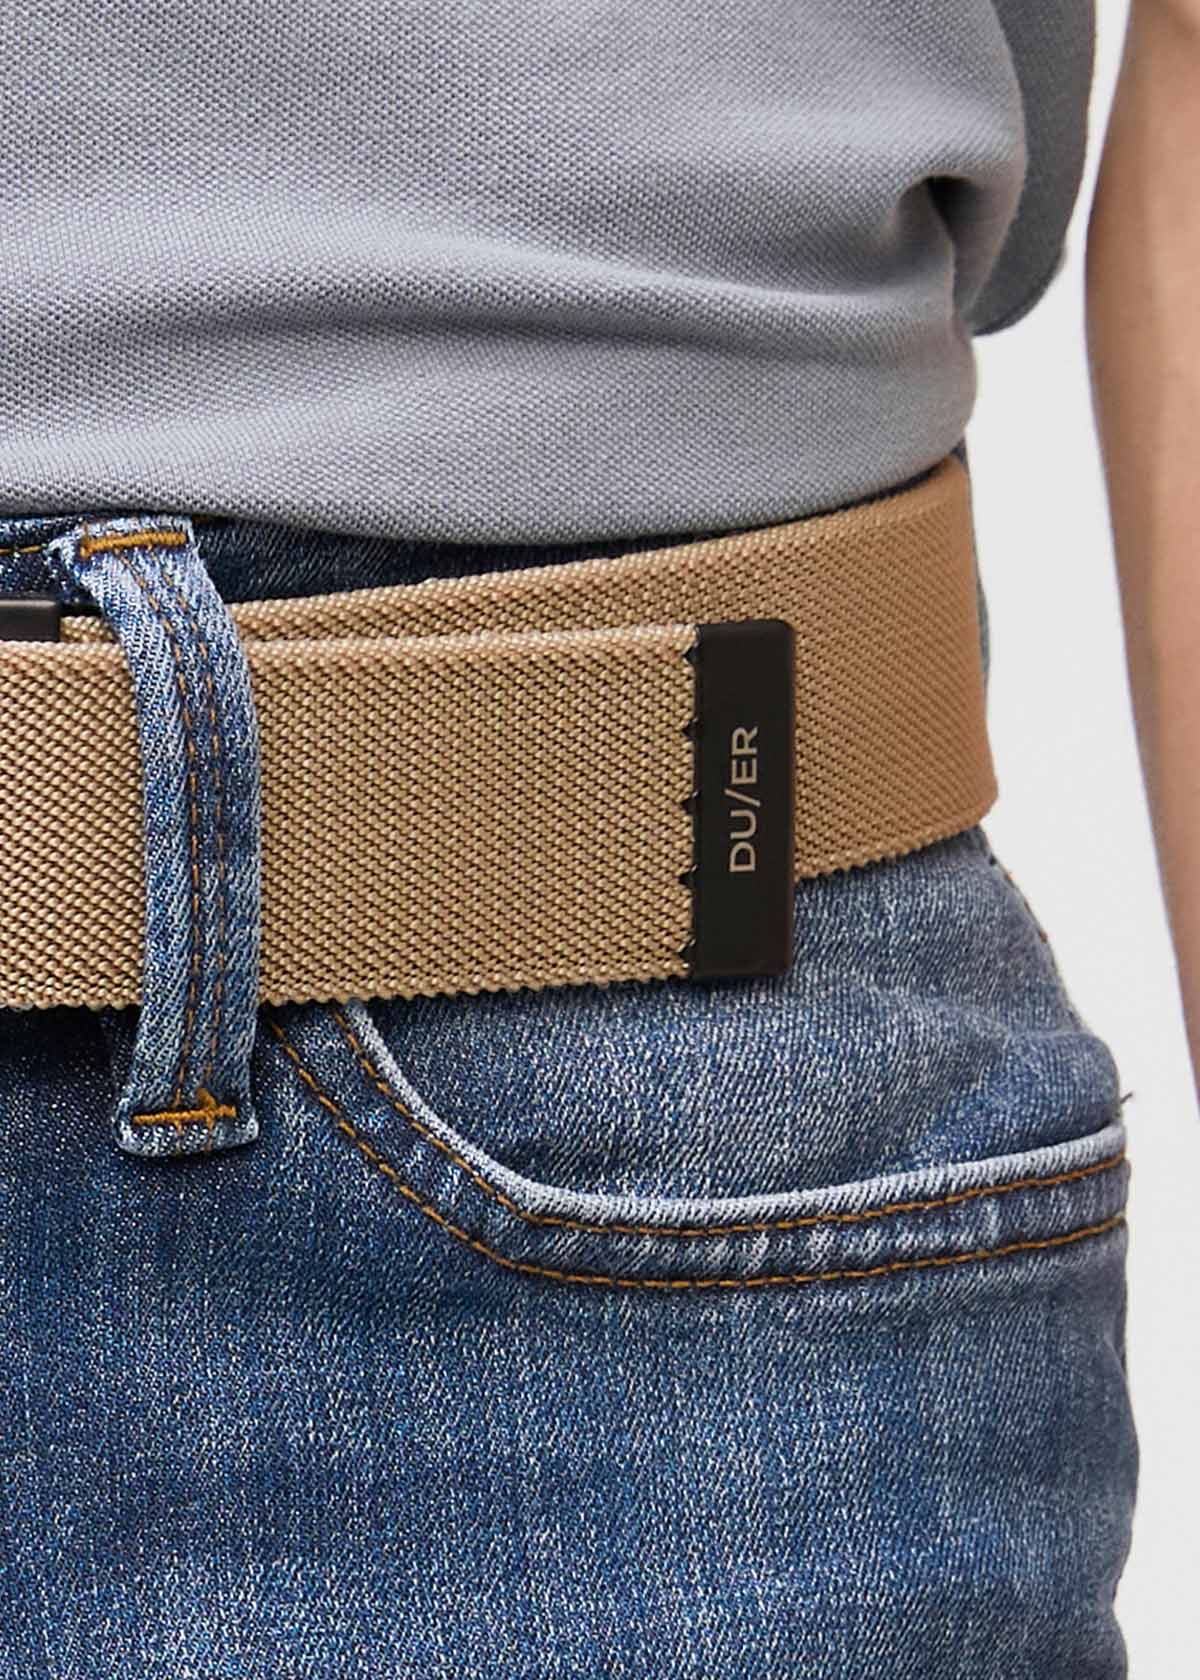 mens silver and tan reversible stretch belt branded detailing